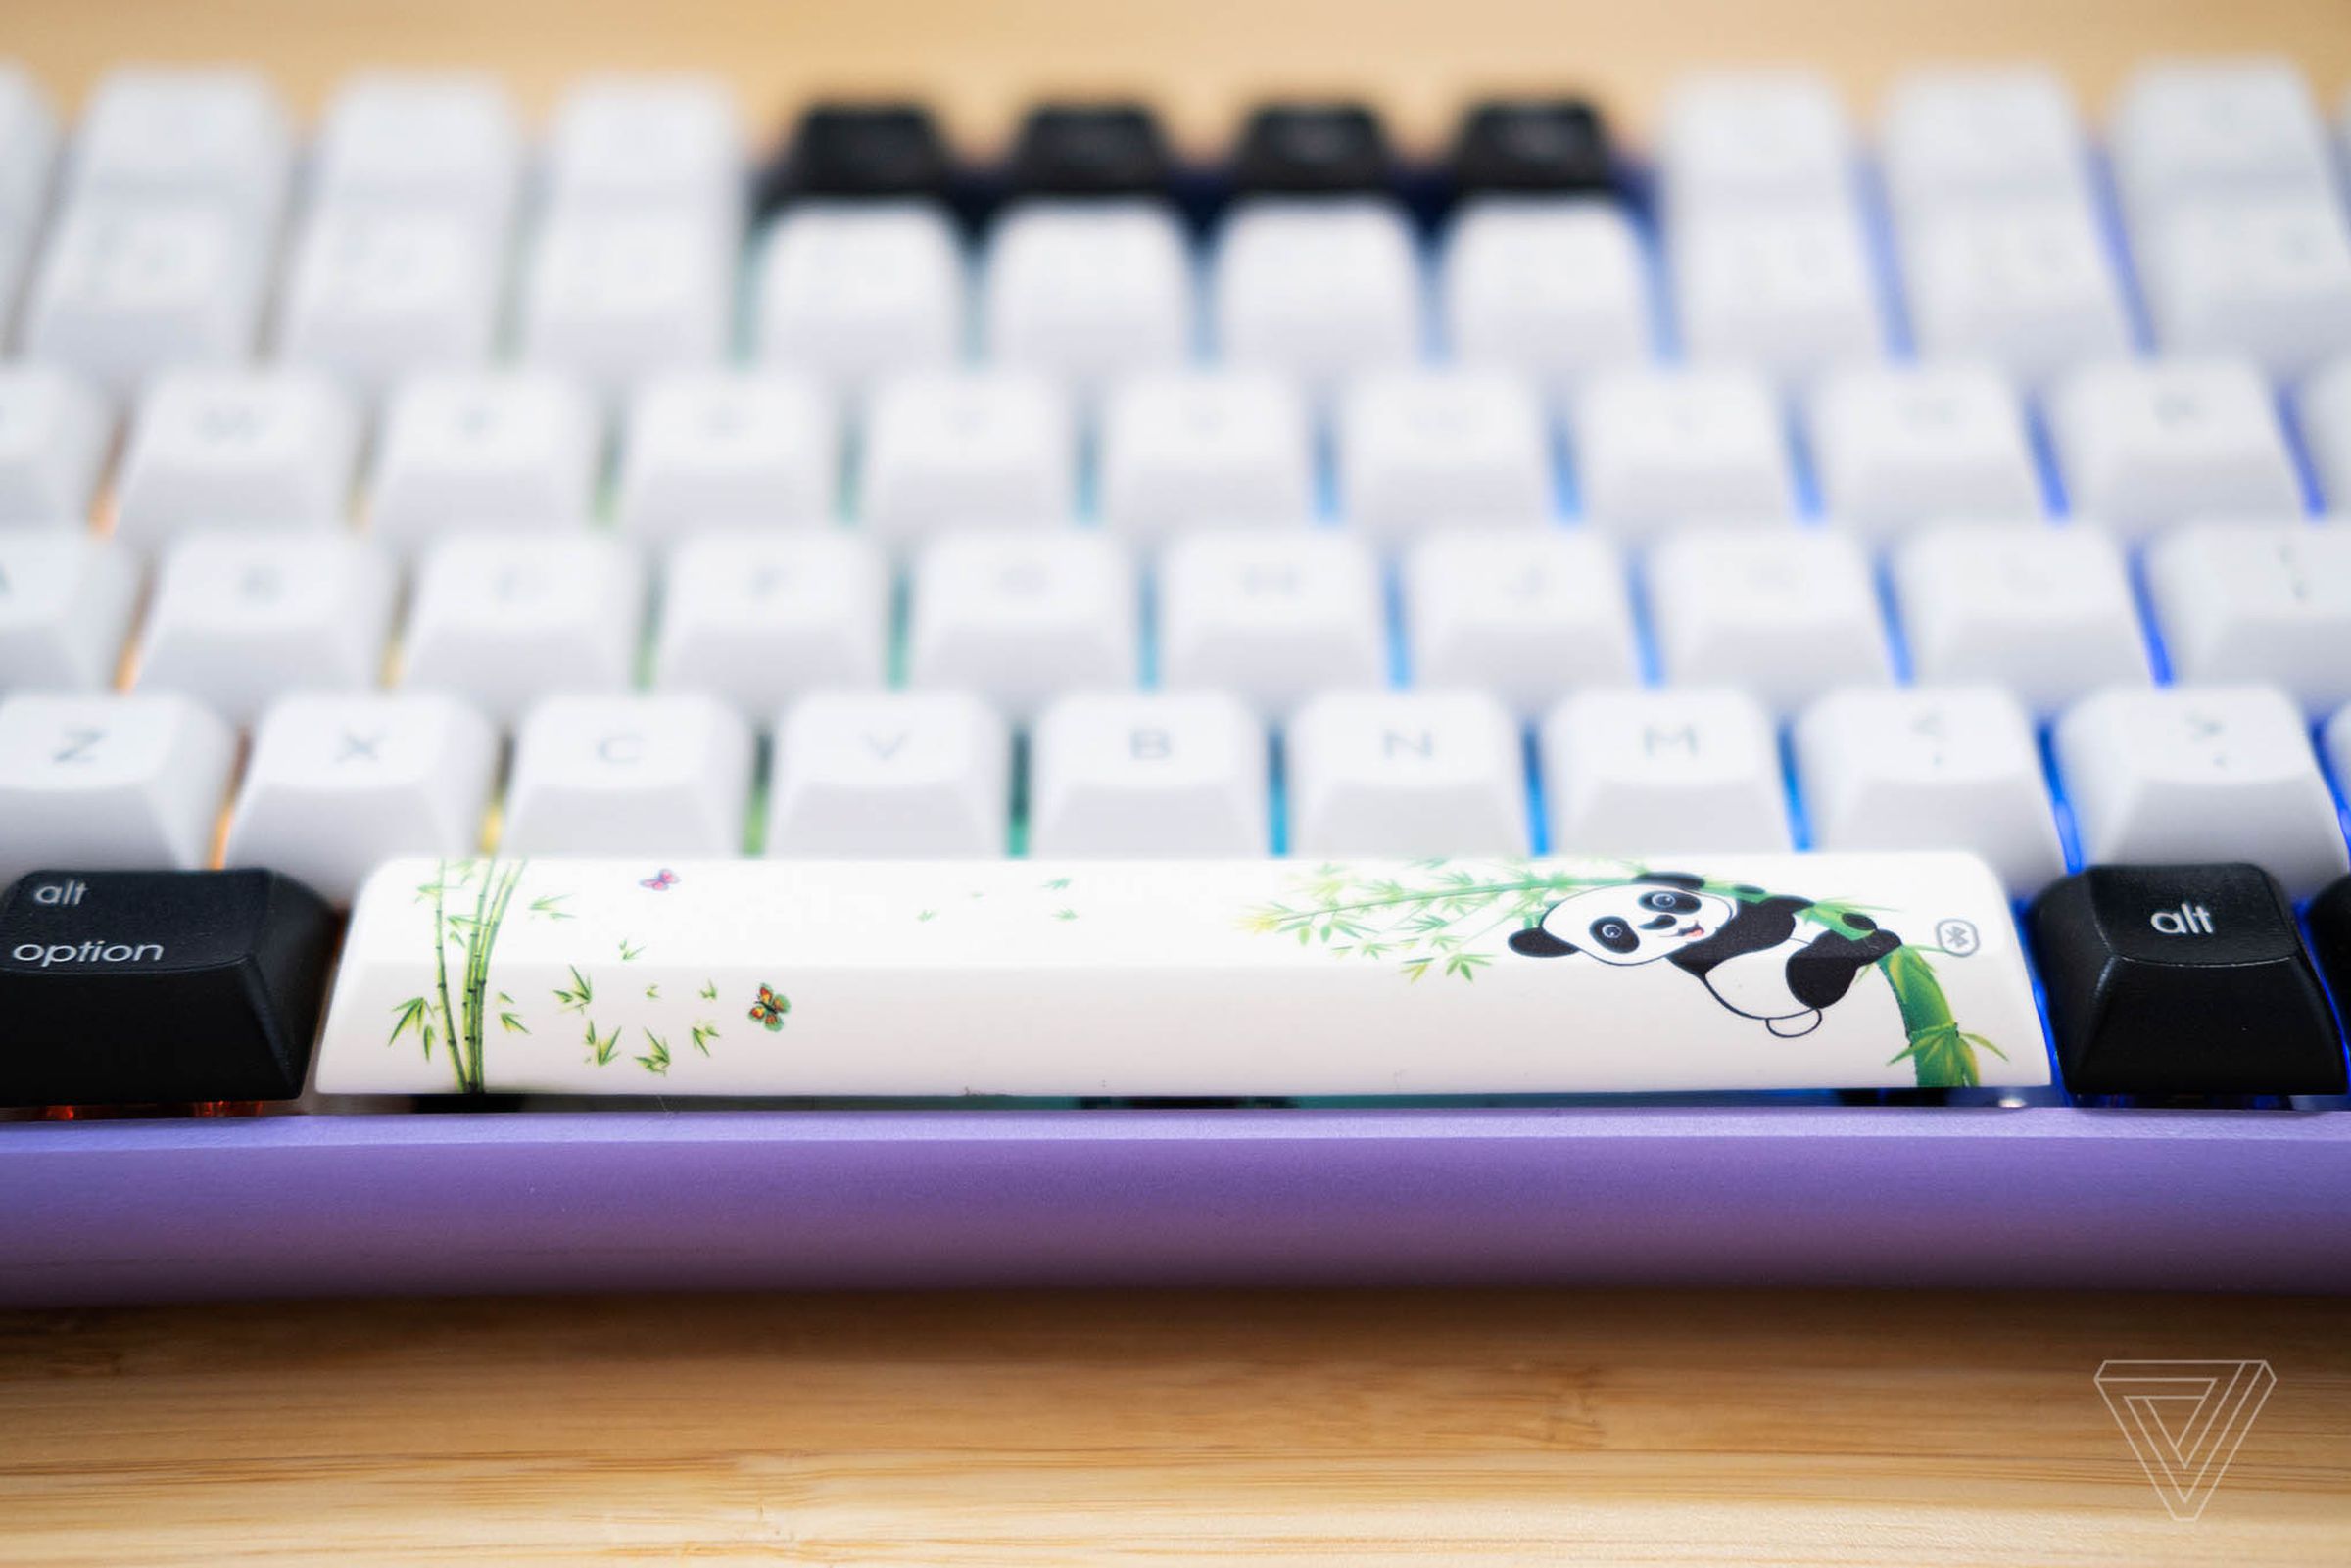 They’re called Panda keycaps for a reason.